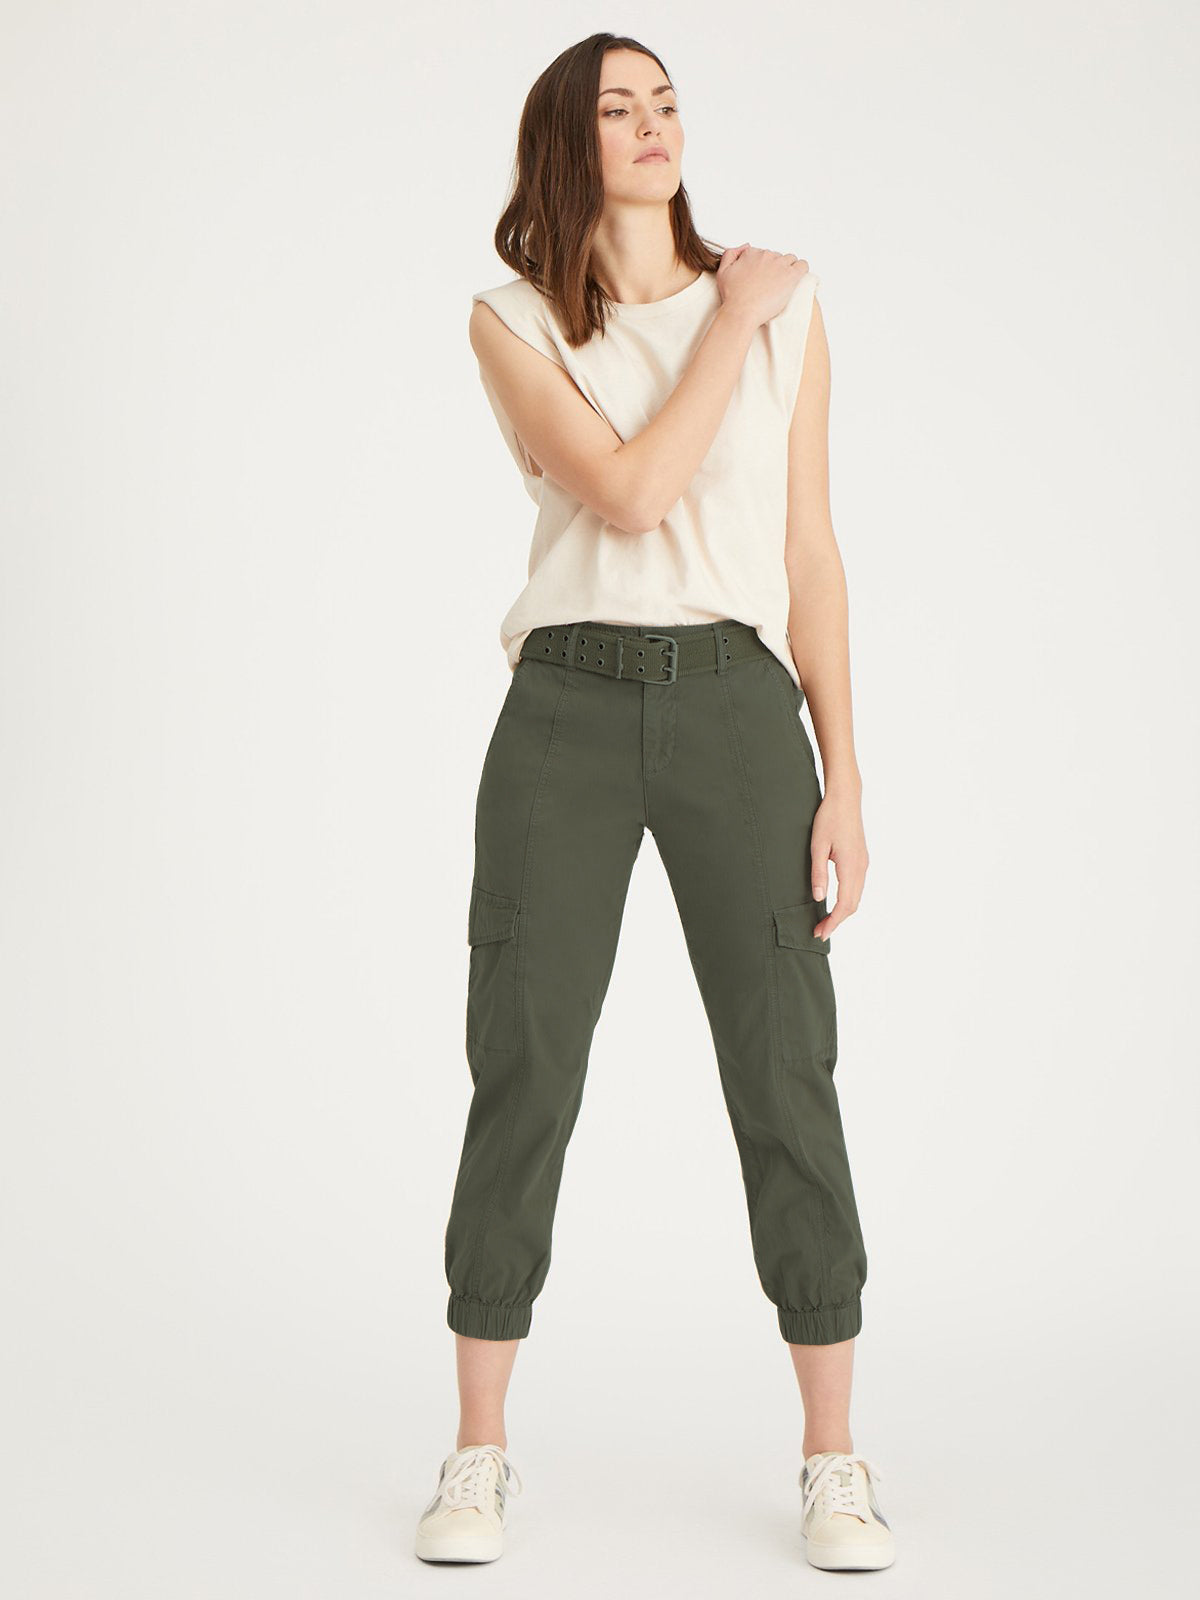 9 Best Cargo Pants for Women You Must Absolutely Own